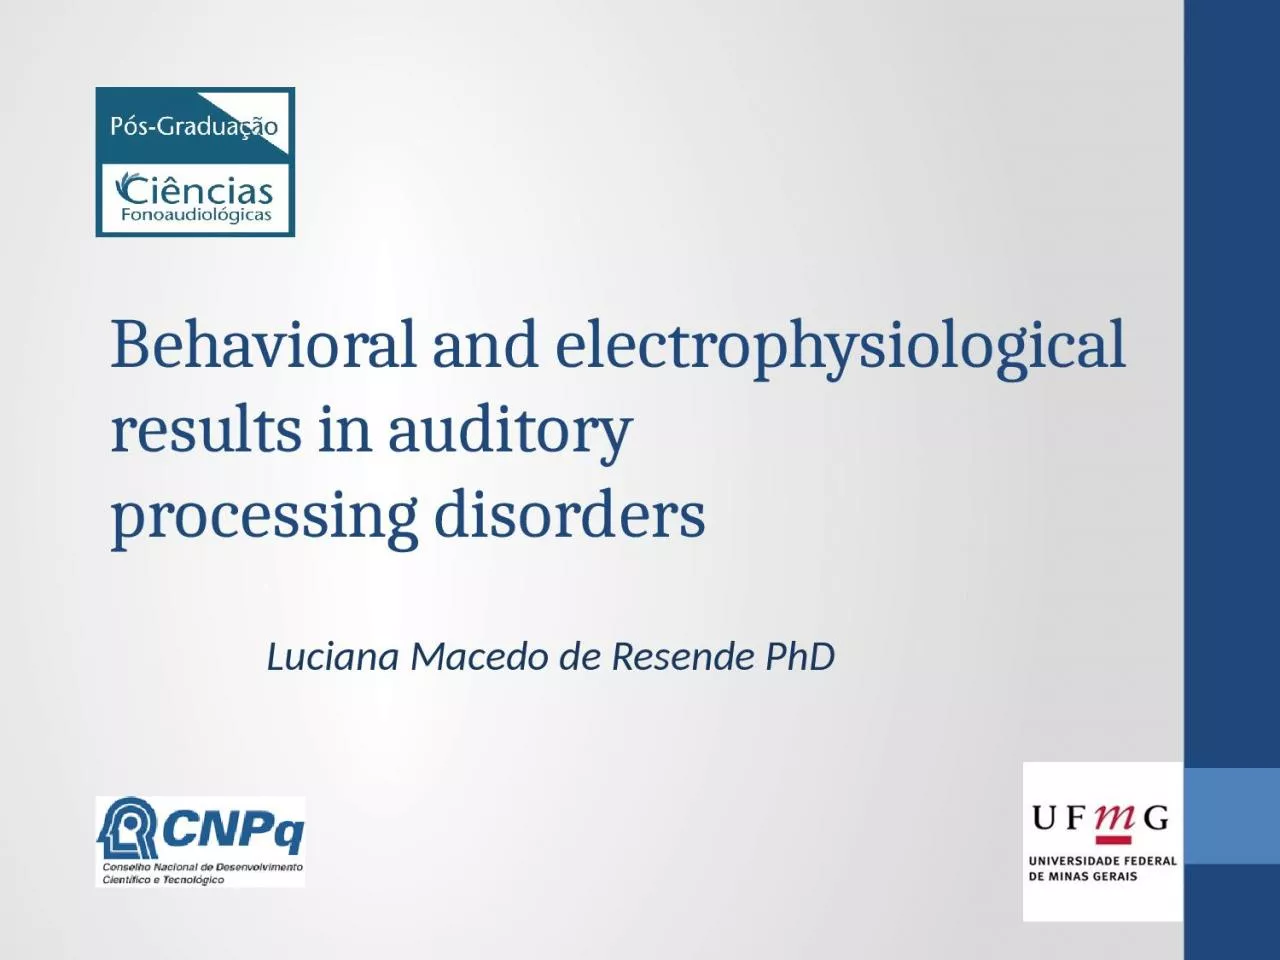 Behavioral and electrophysiological results in auditory